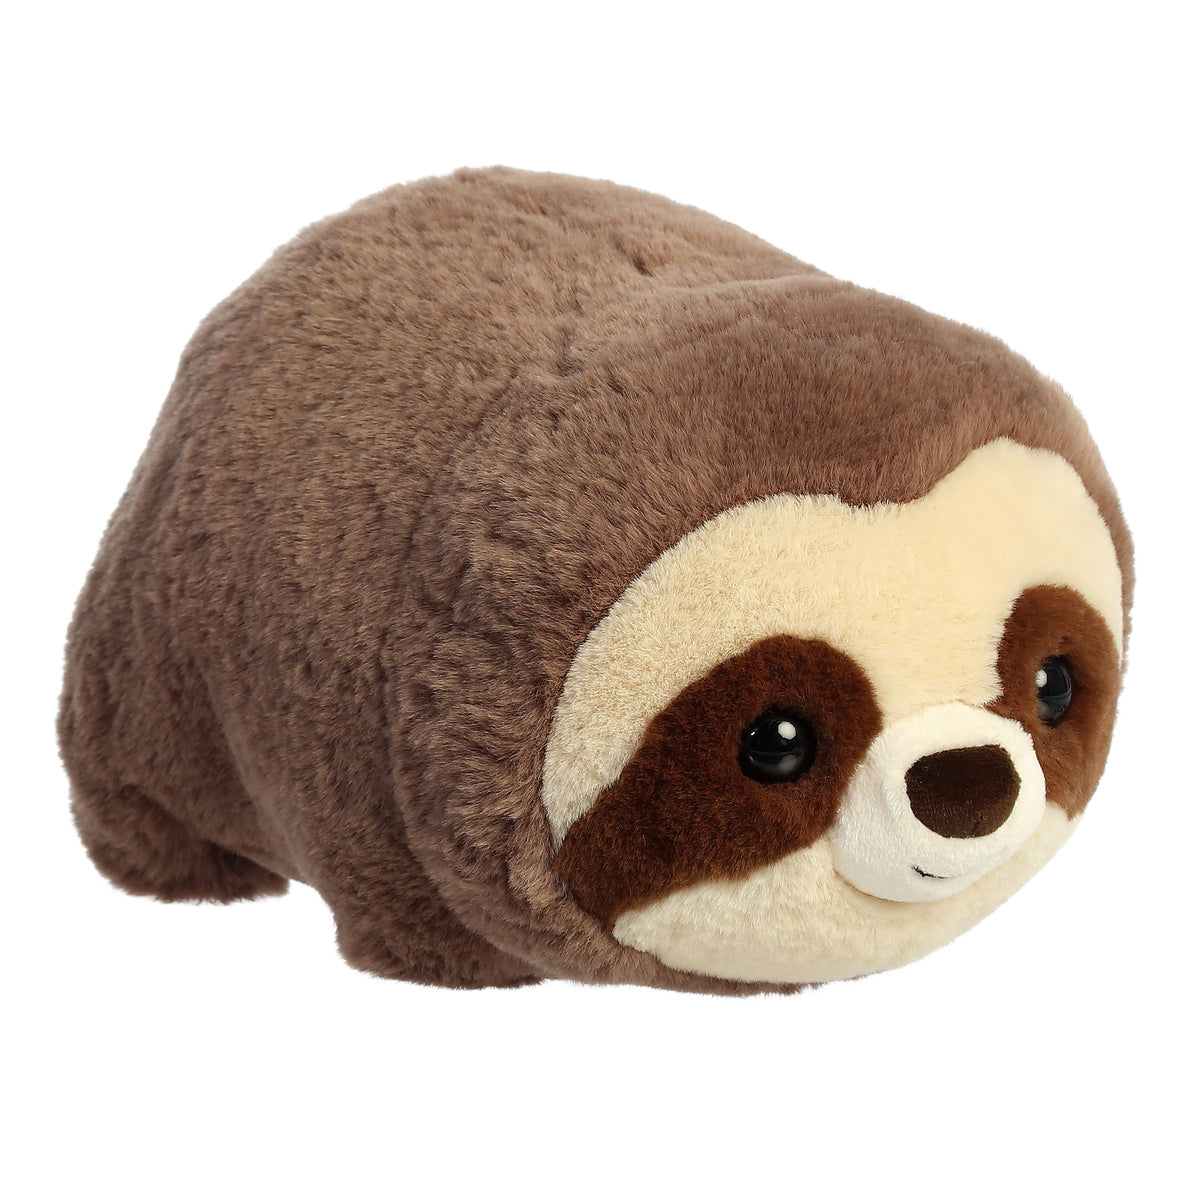 Spark Sloth plush Spudster by Aurora, with a unique potato-sloth design in comforting browns and creams